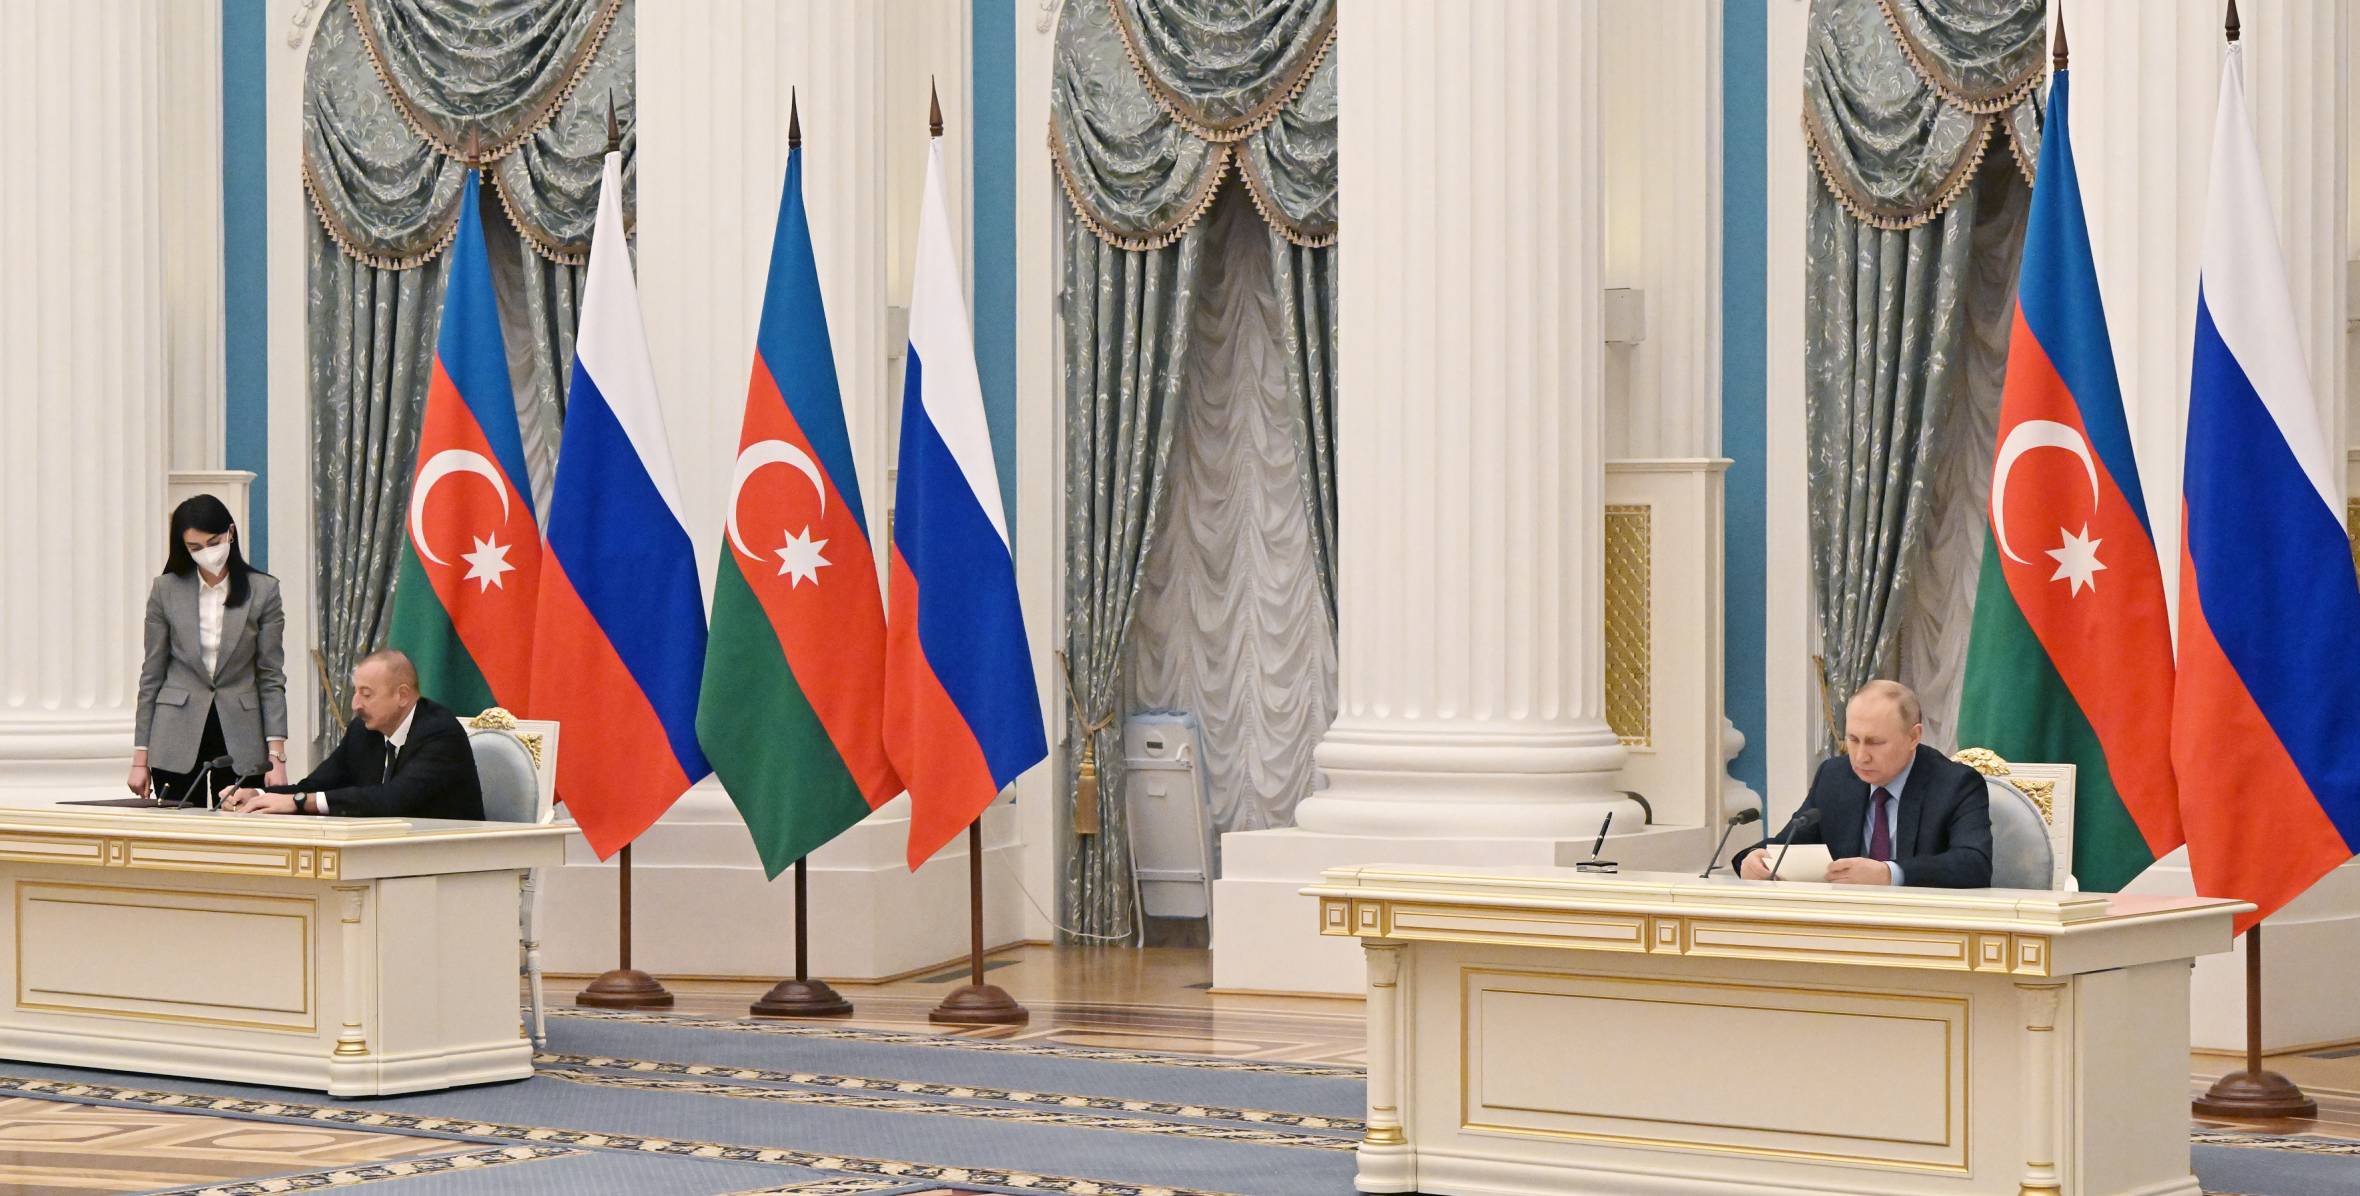 Declaration on “Allied Interaction between the Republic of Azerbaijan and the Russian Federation” was signed in Moscow